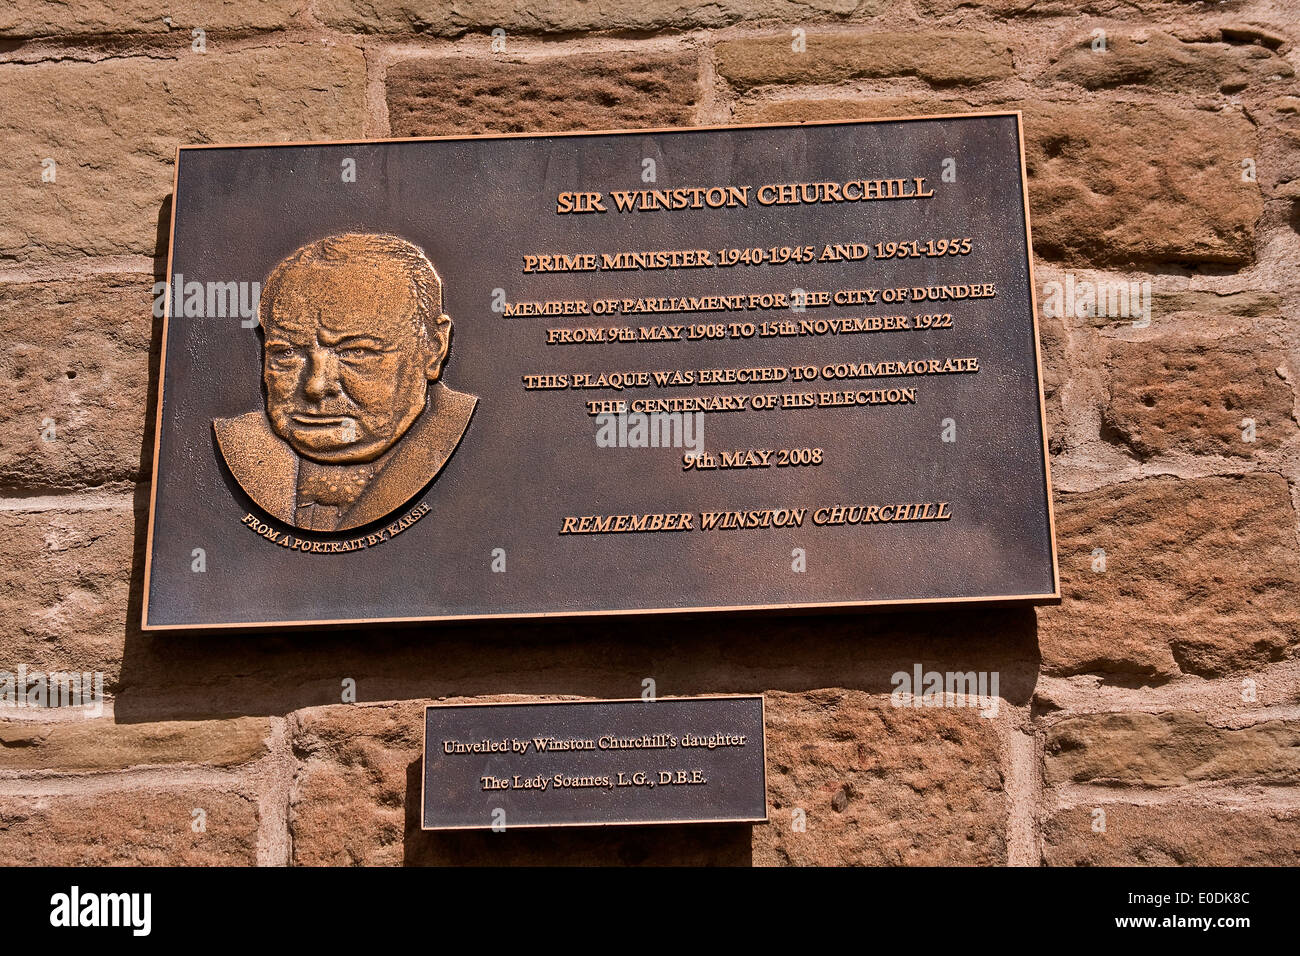 Plaque of Sir Winston Churchill unveiled by his Daughter The Lady Soames on 9th May 2008 in Dundee, UK Stock Photo